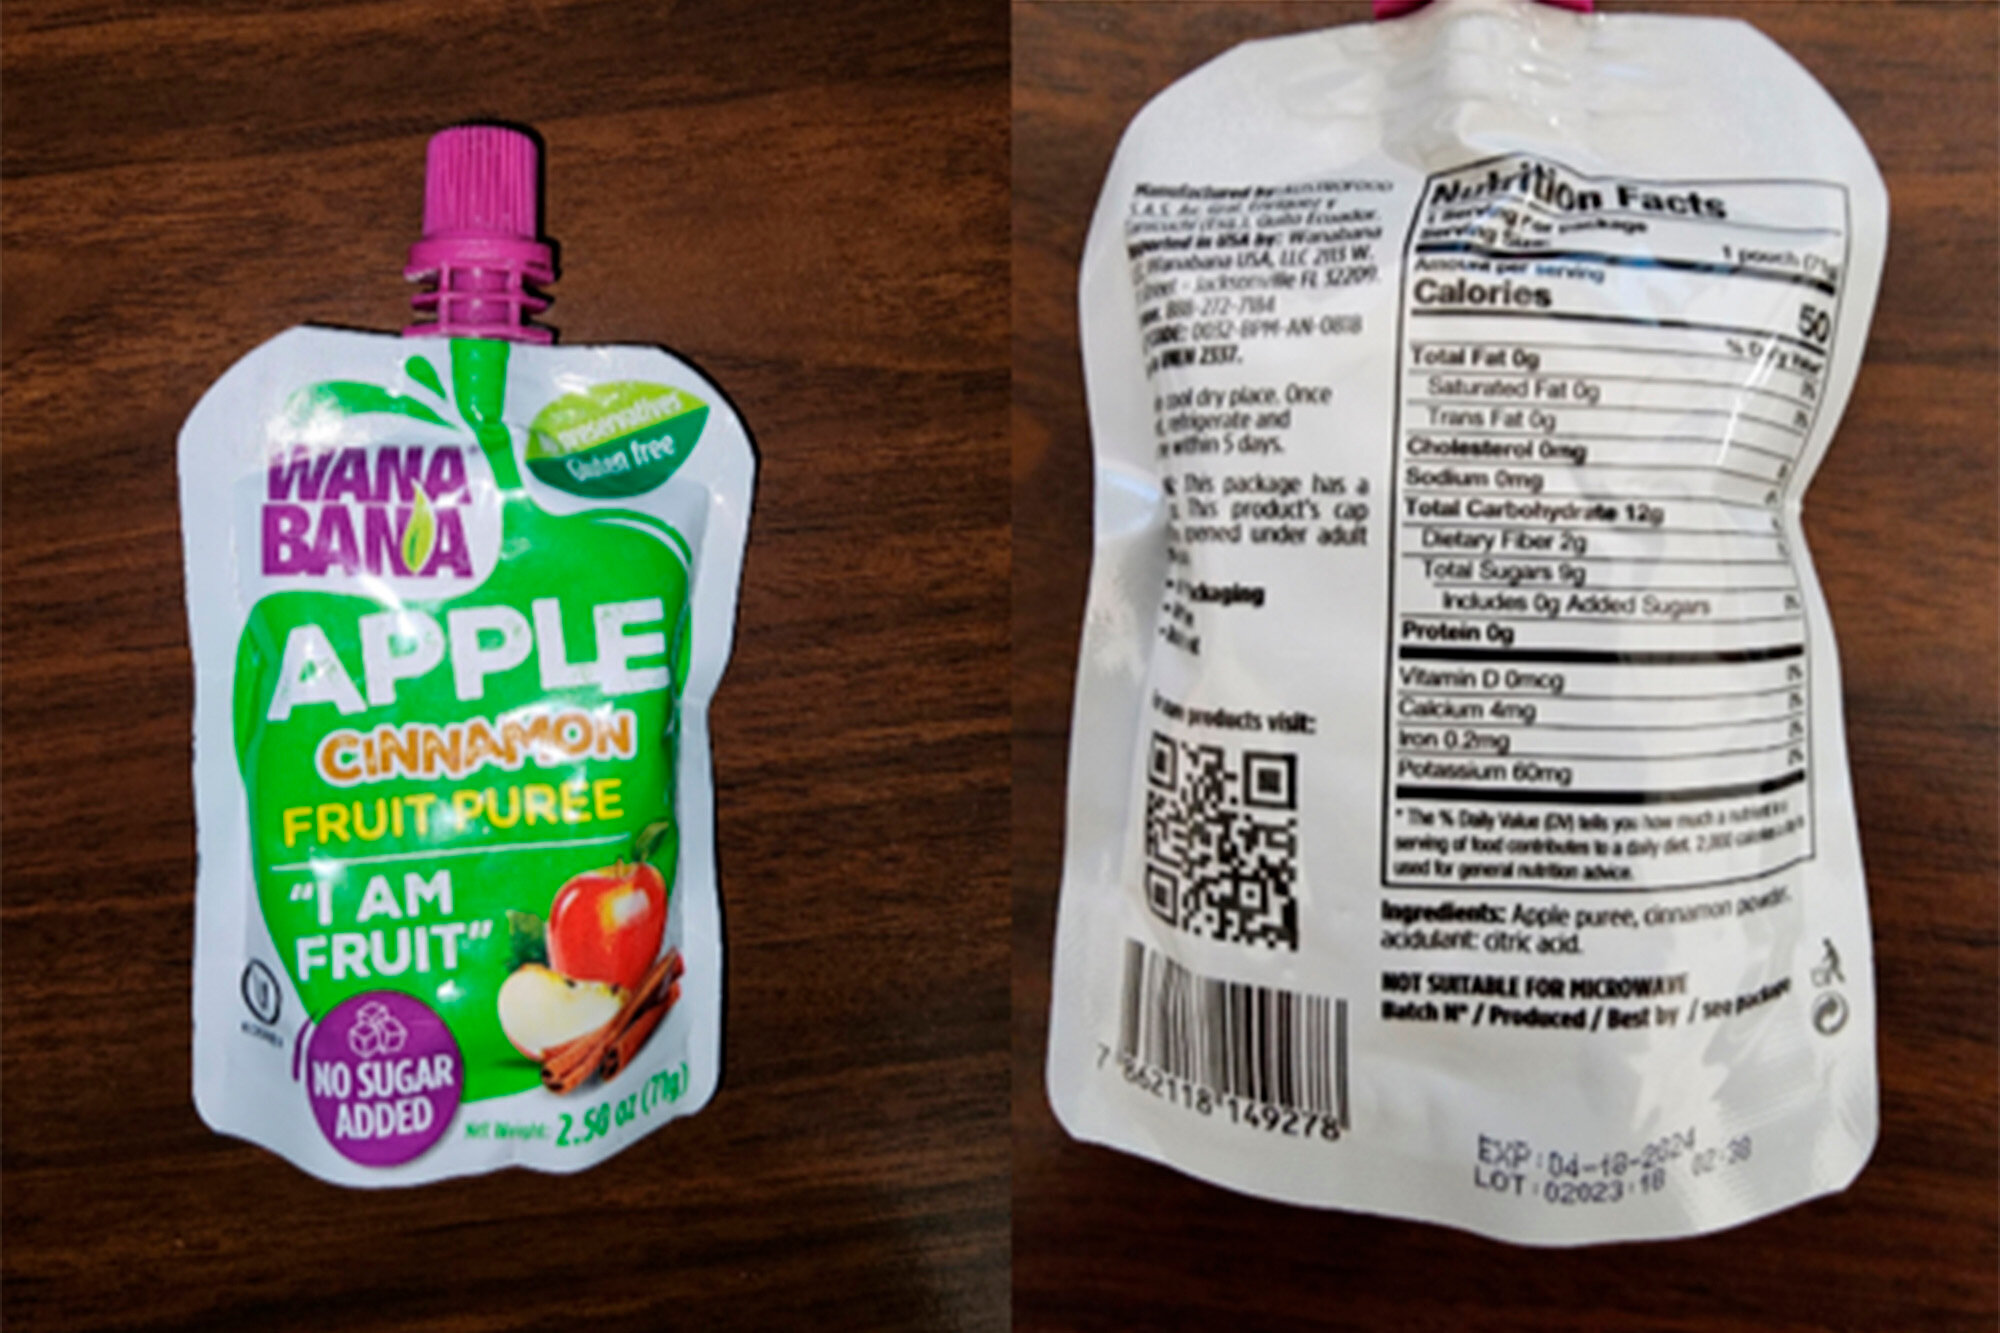 This photo provided by the U.S. Food and Drug Administration on Oct. 28, 2023, shows a WanaBana apple cinnamon fruit puree pouch. On Monday, Nov. 13, 2023, U.S. health officials are warning doctors to be on the lookout for possible cases of lead poisoning in children after at least 22 toddlers in 14 states were sickened by lead linked to tainted pouches of cinnamon apple puree and applesauce. Brands include WanaBana brand apple cinnamon fruit puree and Schnucks and Weis brand cinnamon applesauce pouches. The products were sold in stores and online.